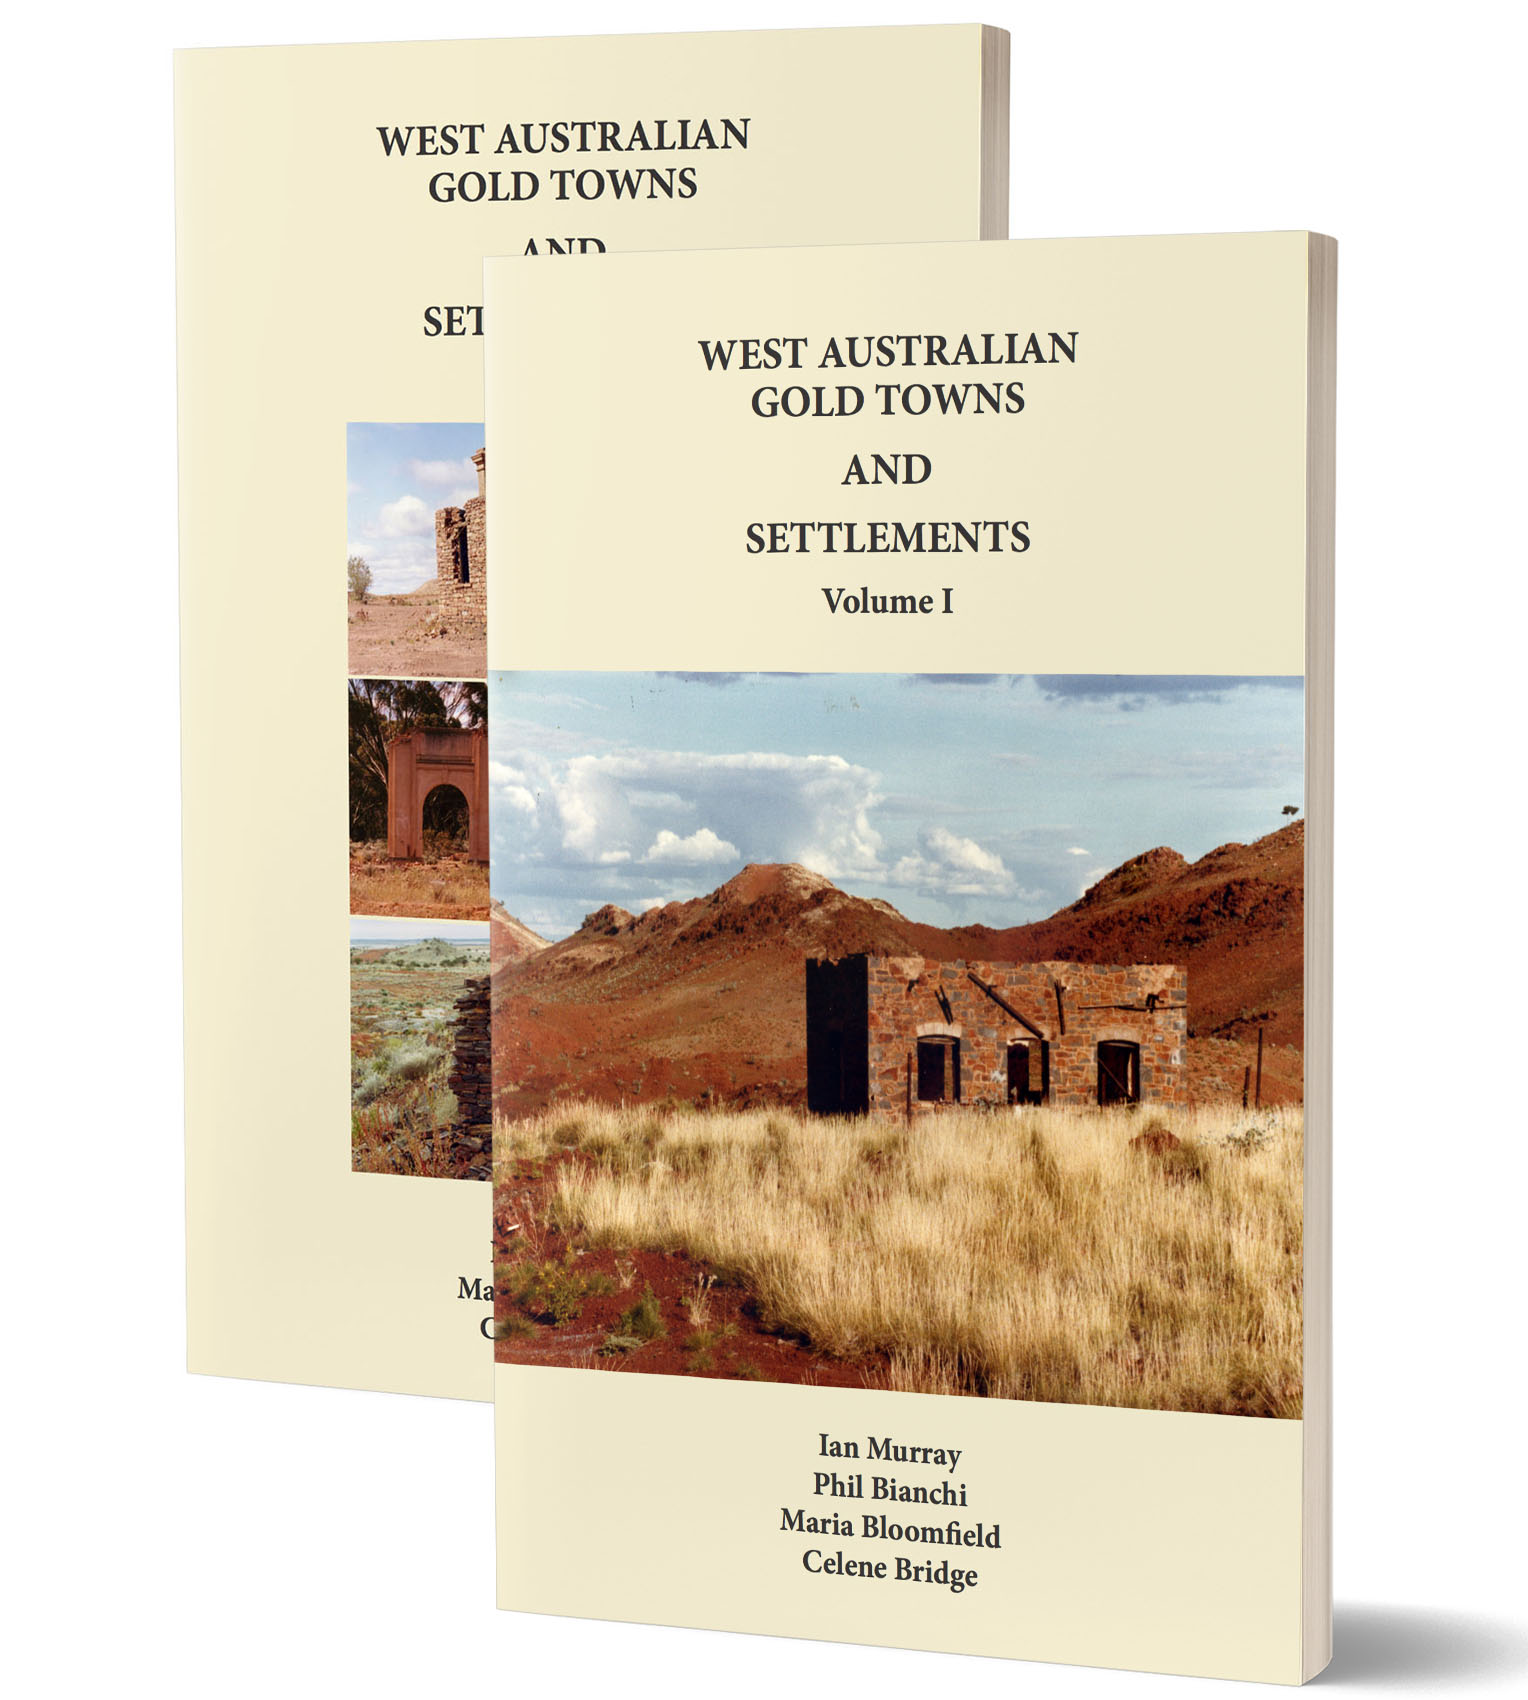 West Australian Gold Towns and Settlements